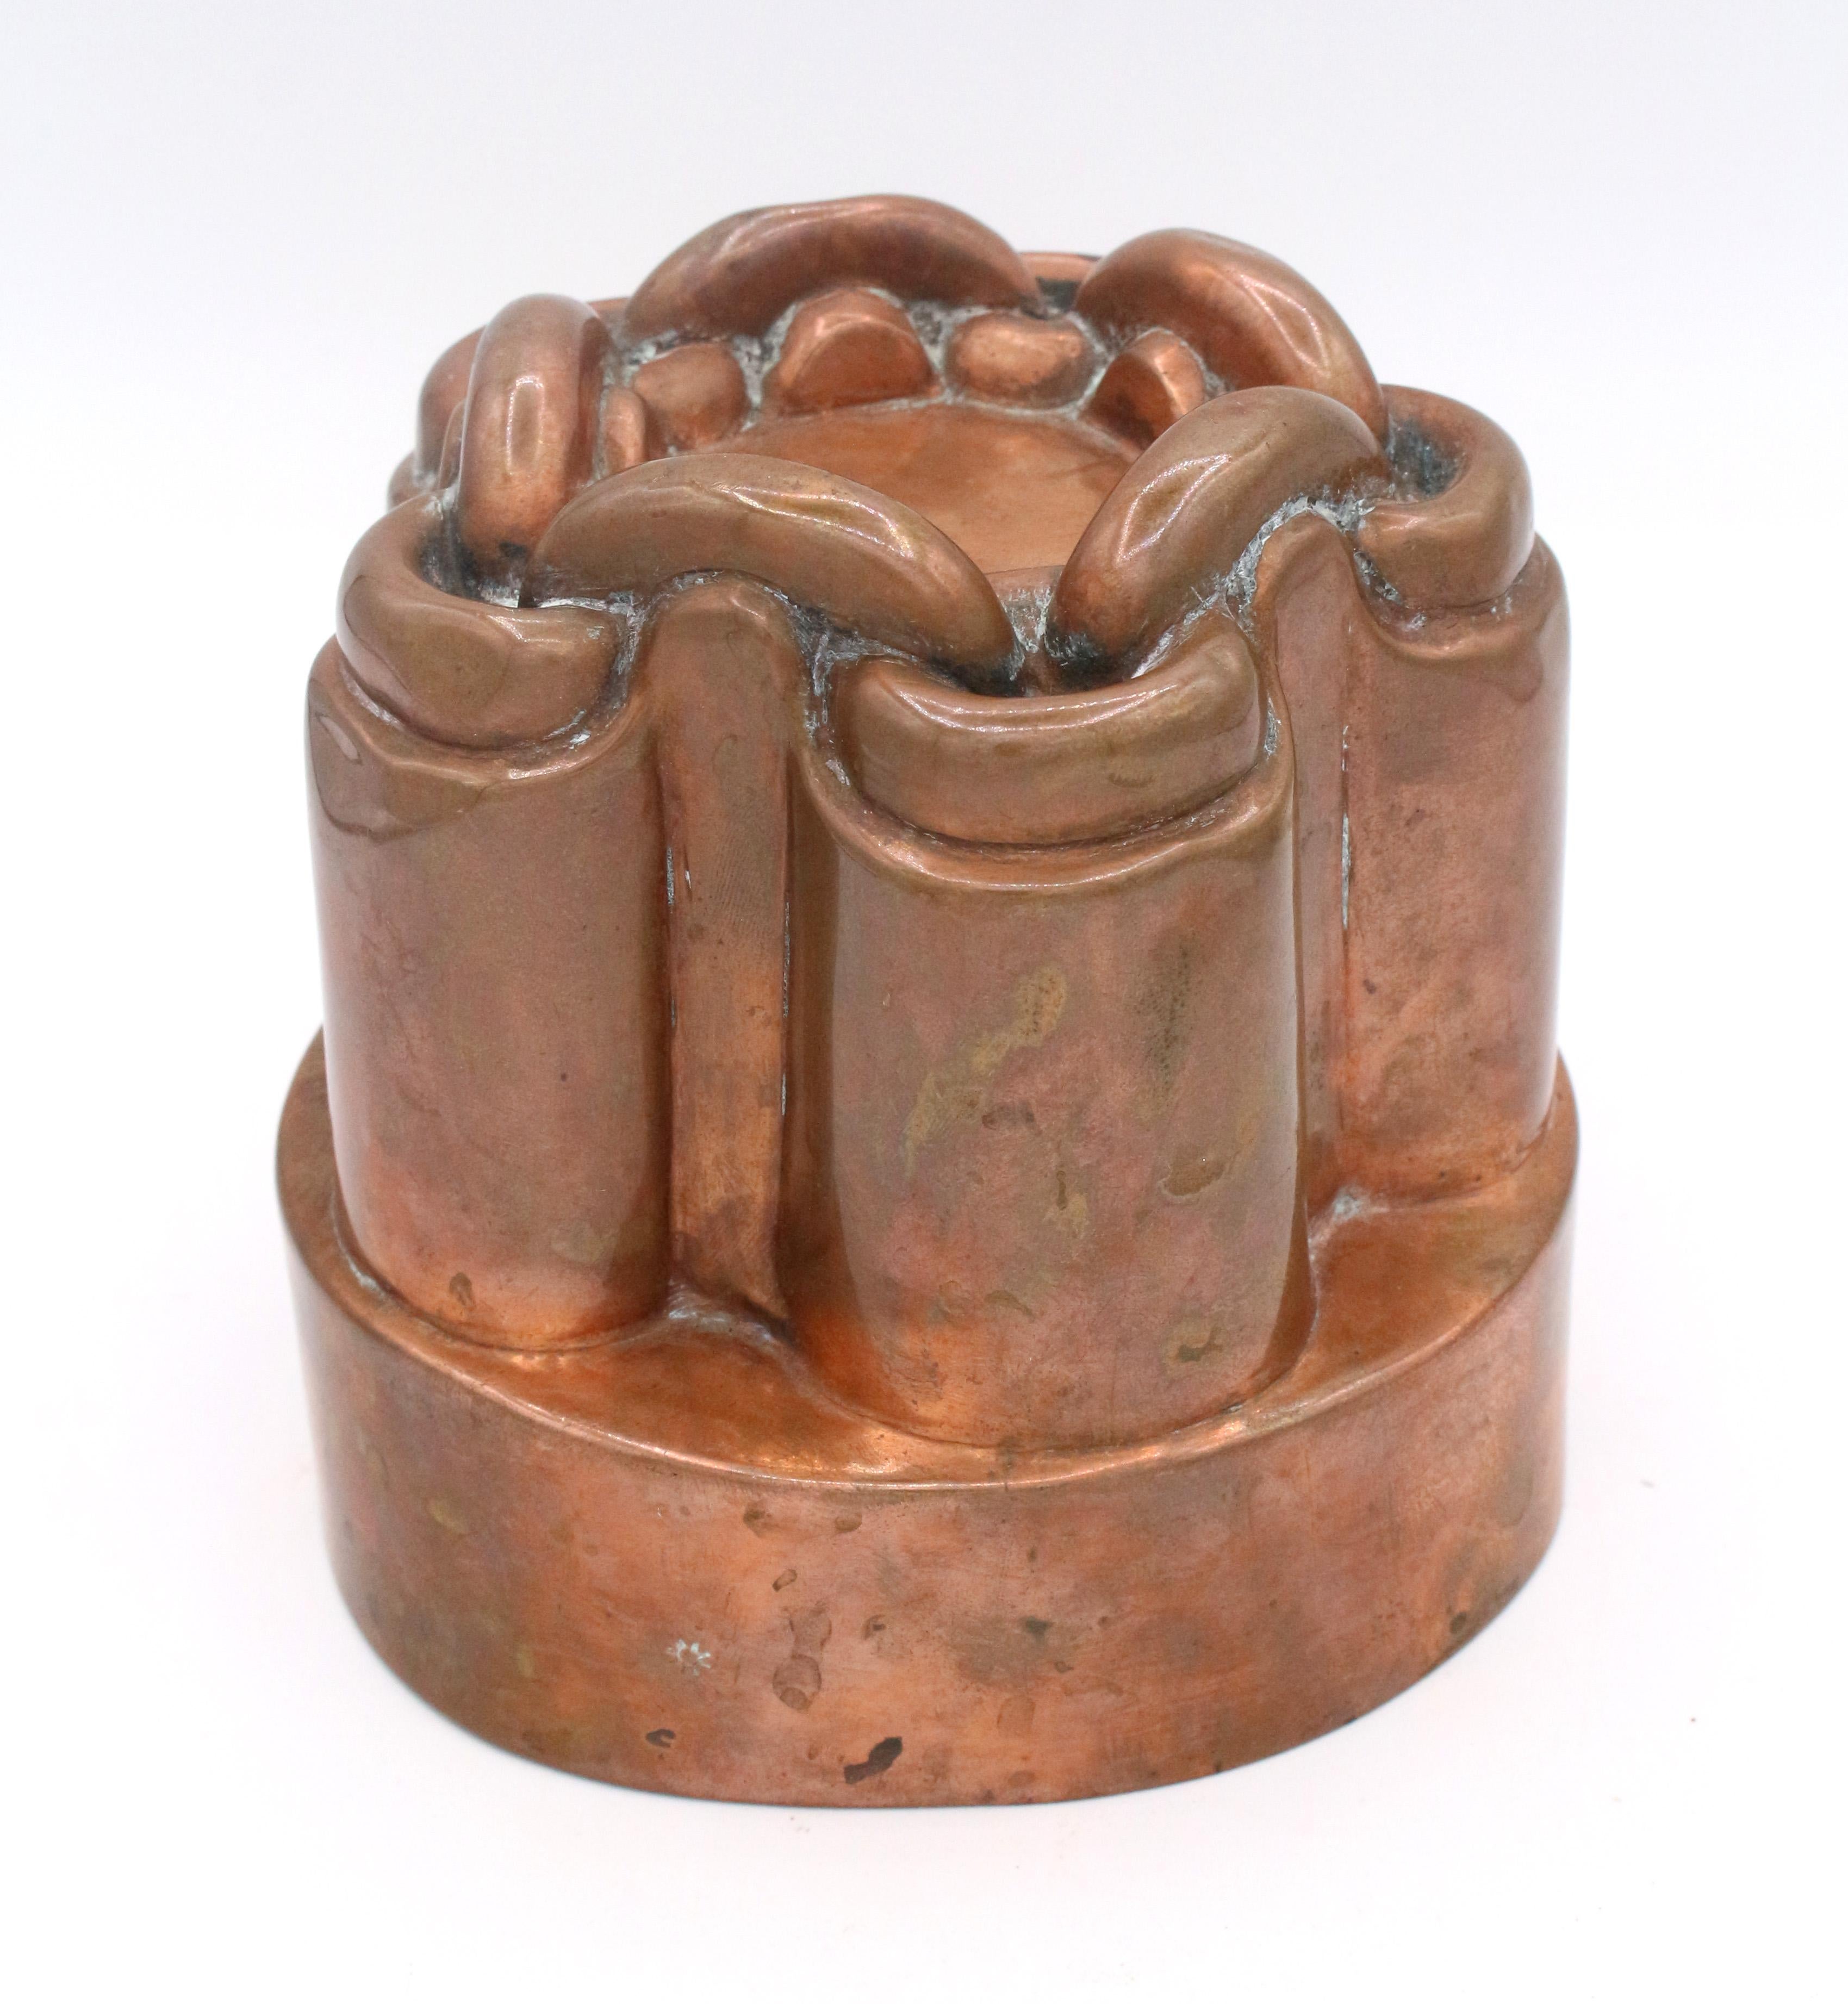 A c.1860-75 English copper jelly mold by Benham with orb & cross opposing sun marks. Chain motif.
5